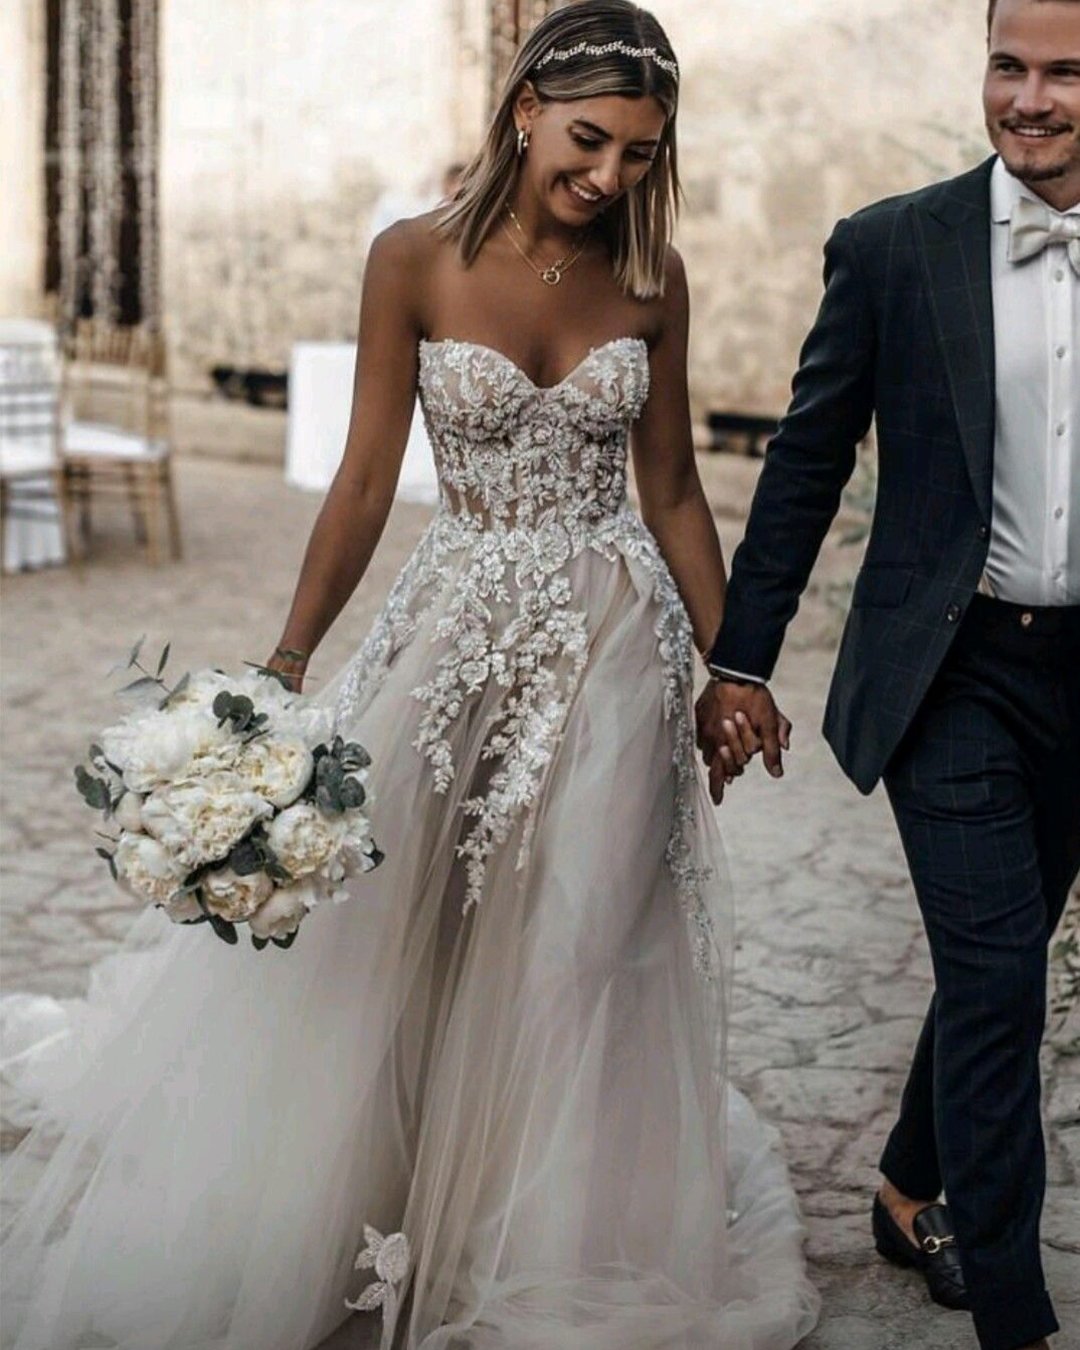 witch Perforate servant Boho Wedding Dresses: 36 Looks For Free-Spirited Bride + Faqs